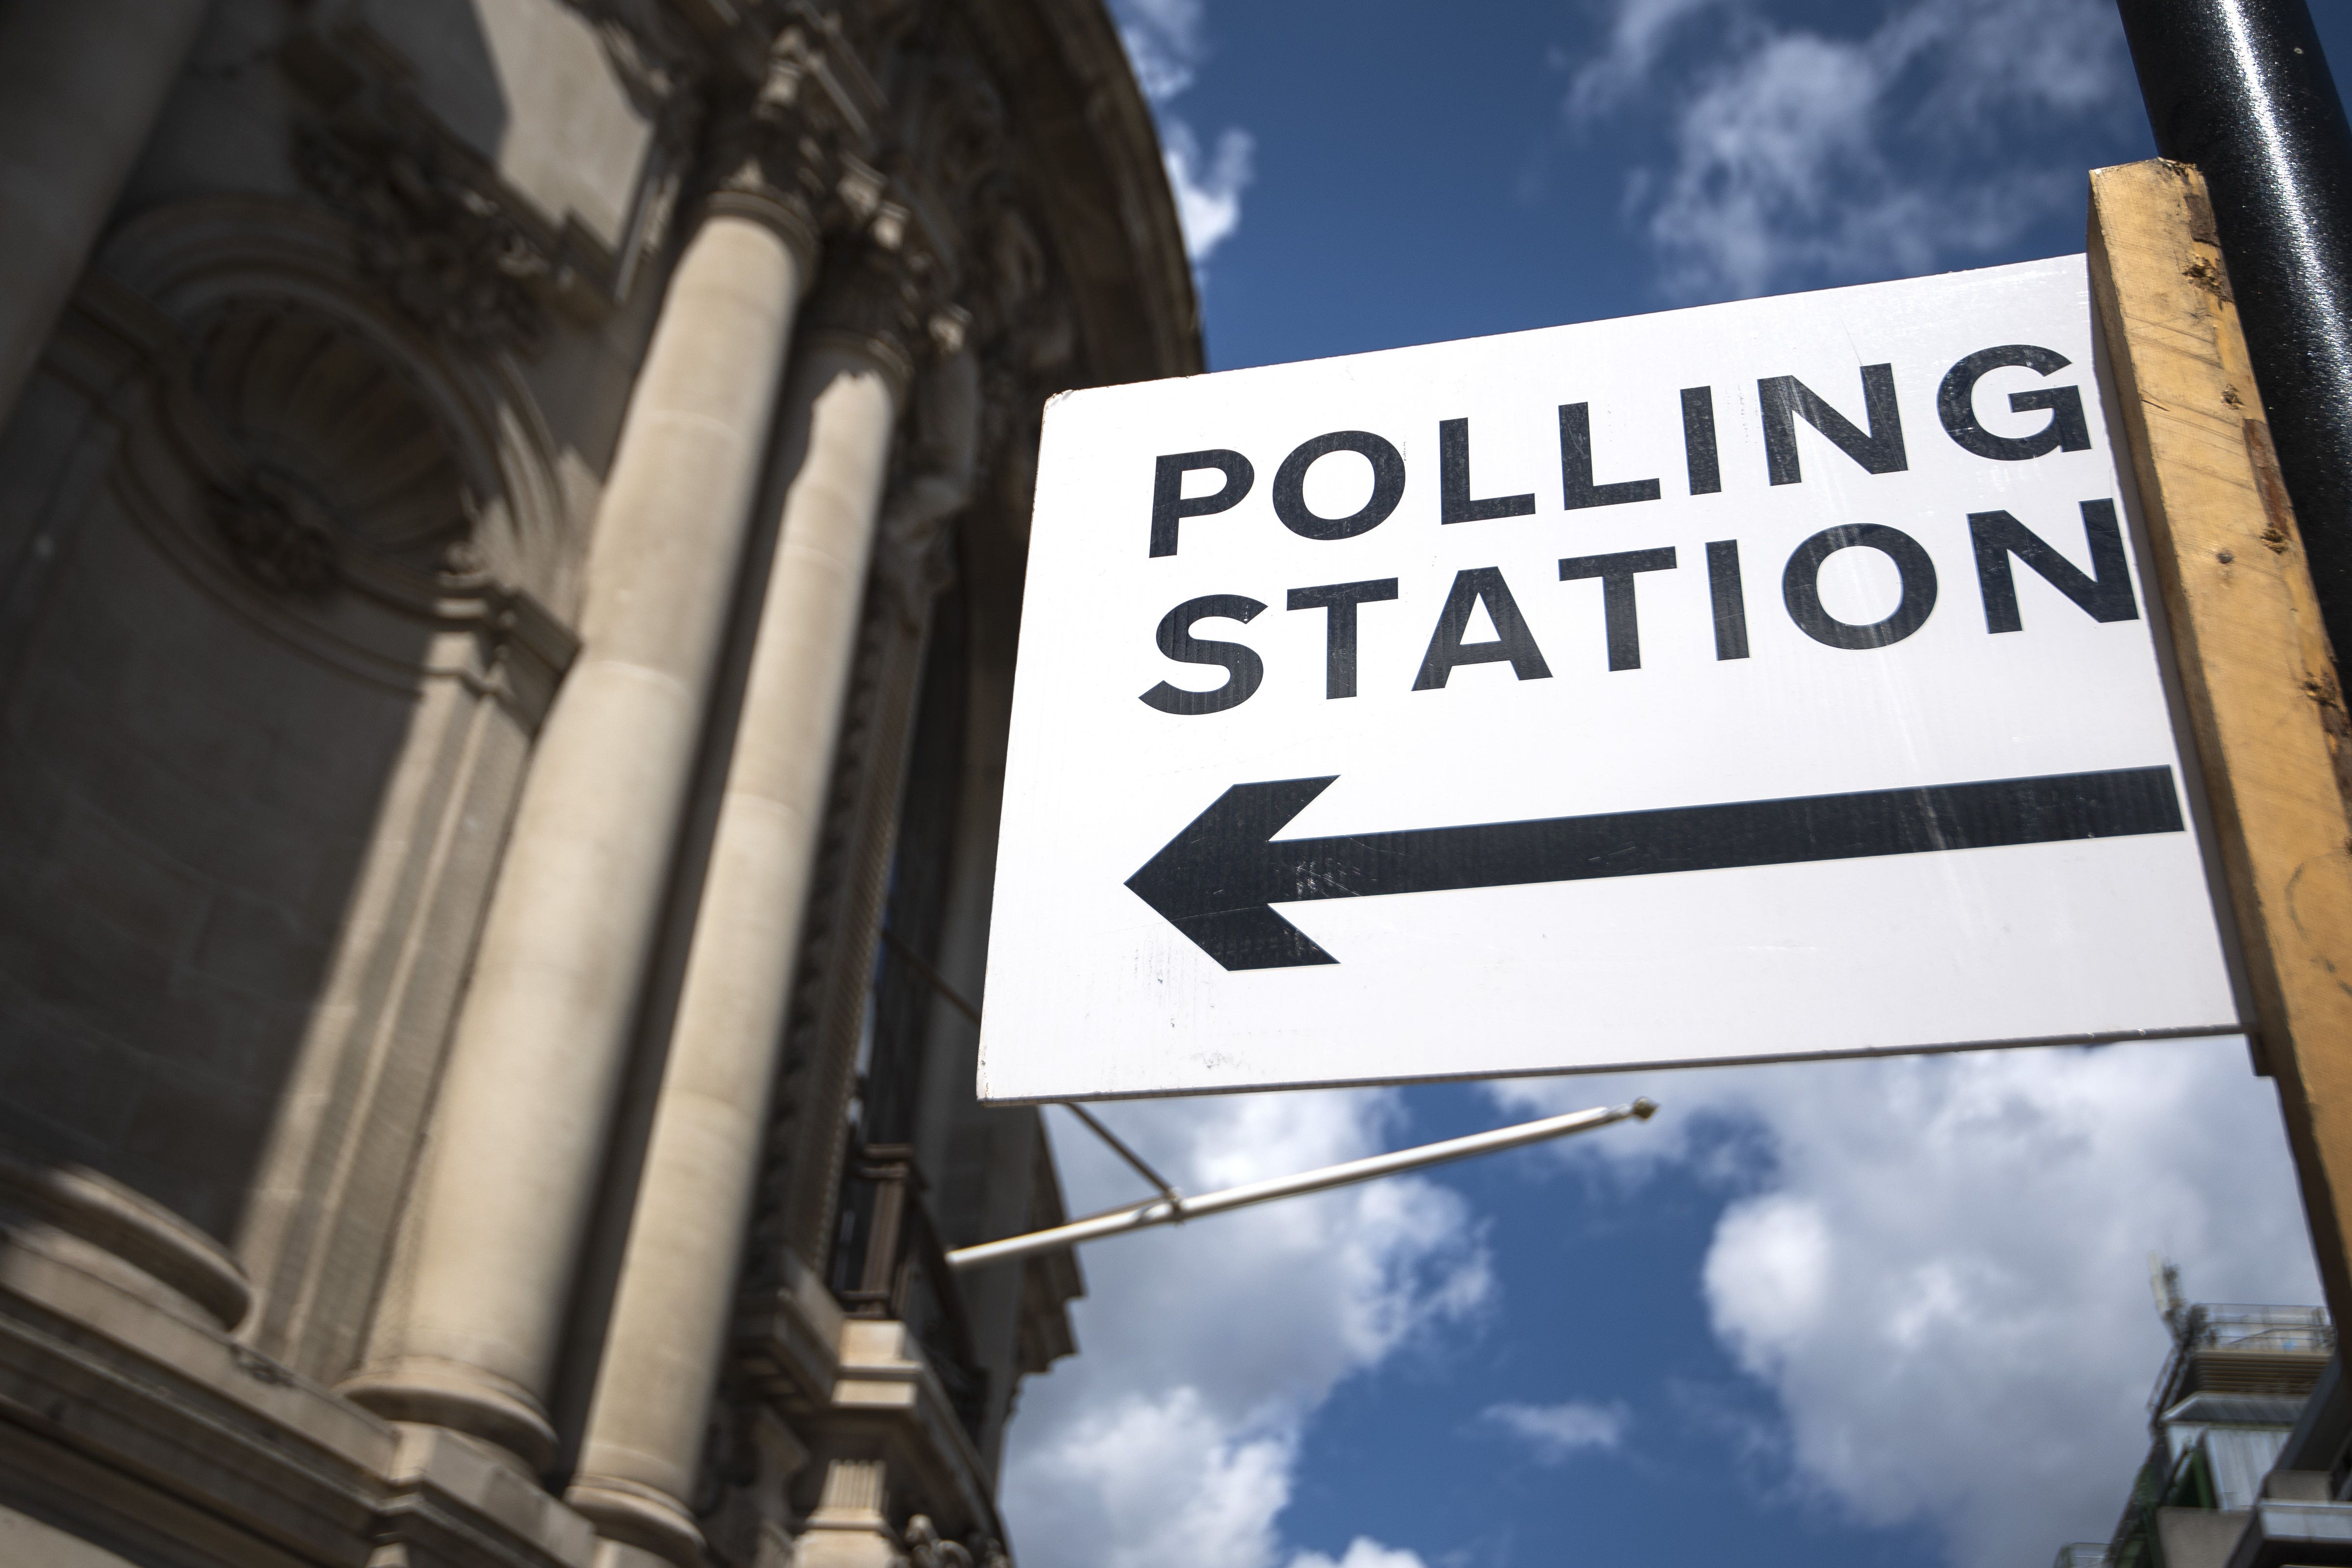 Millions of voters will come across the new rules for the first time next week